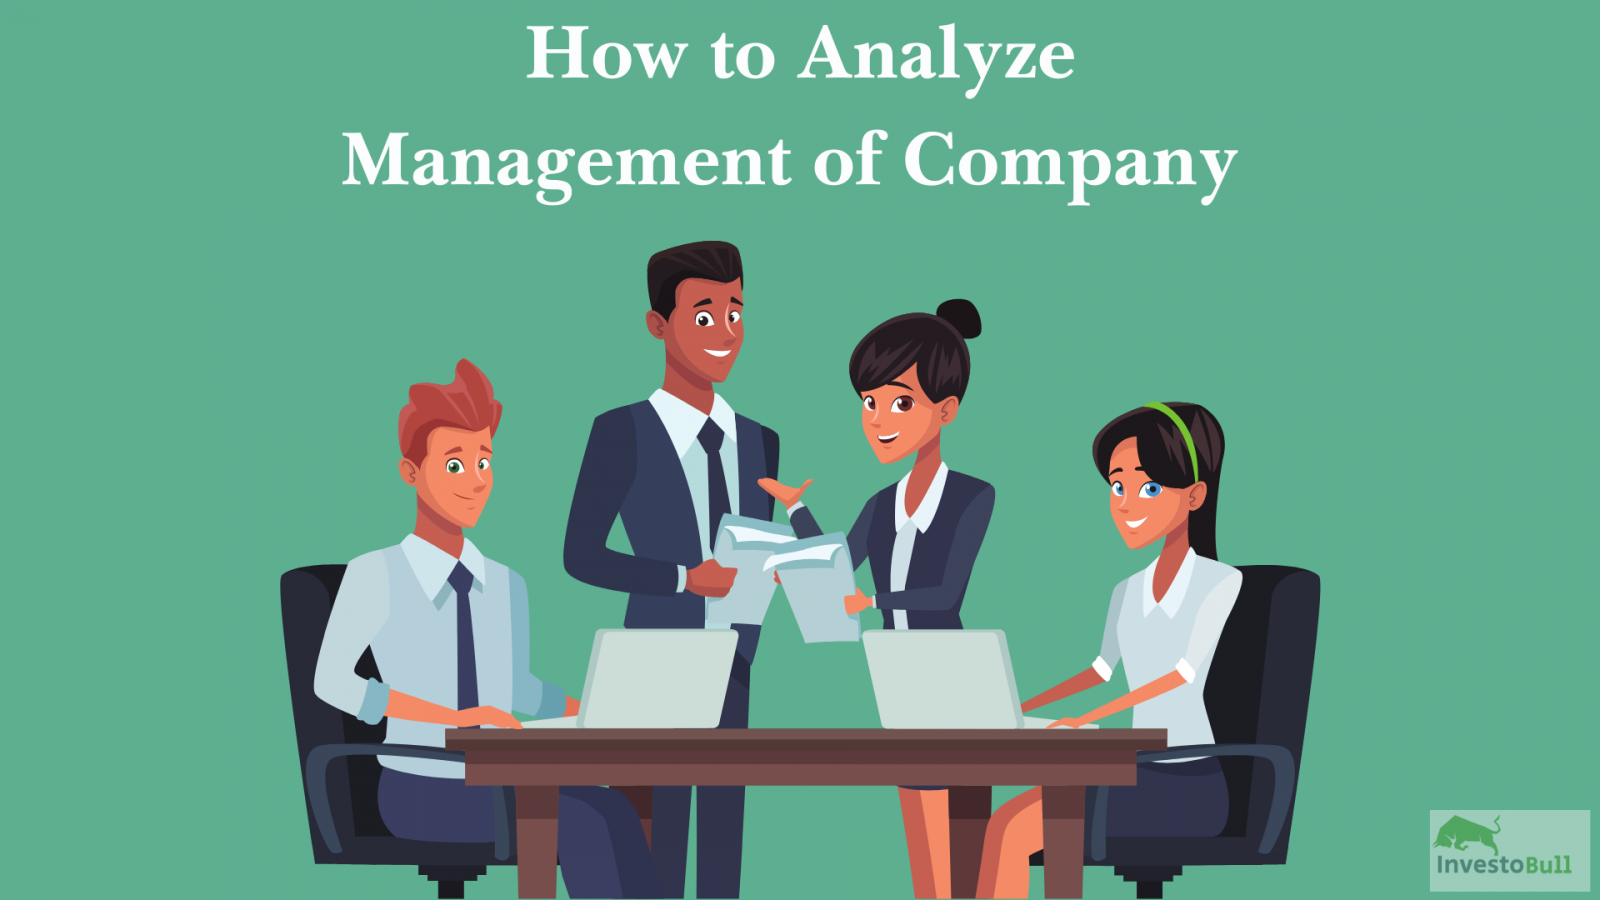 How to analyze management of a company